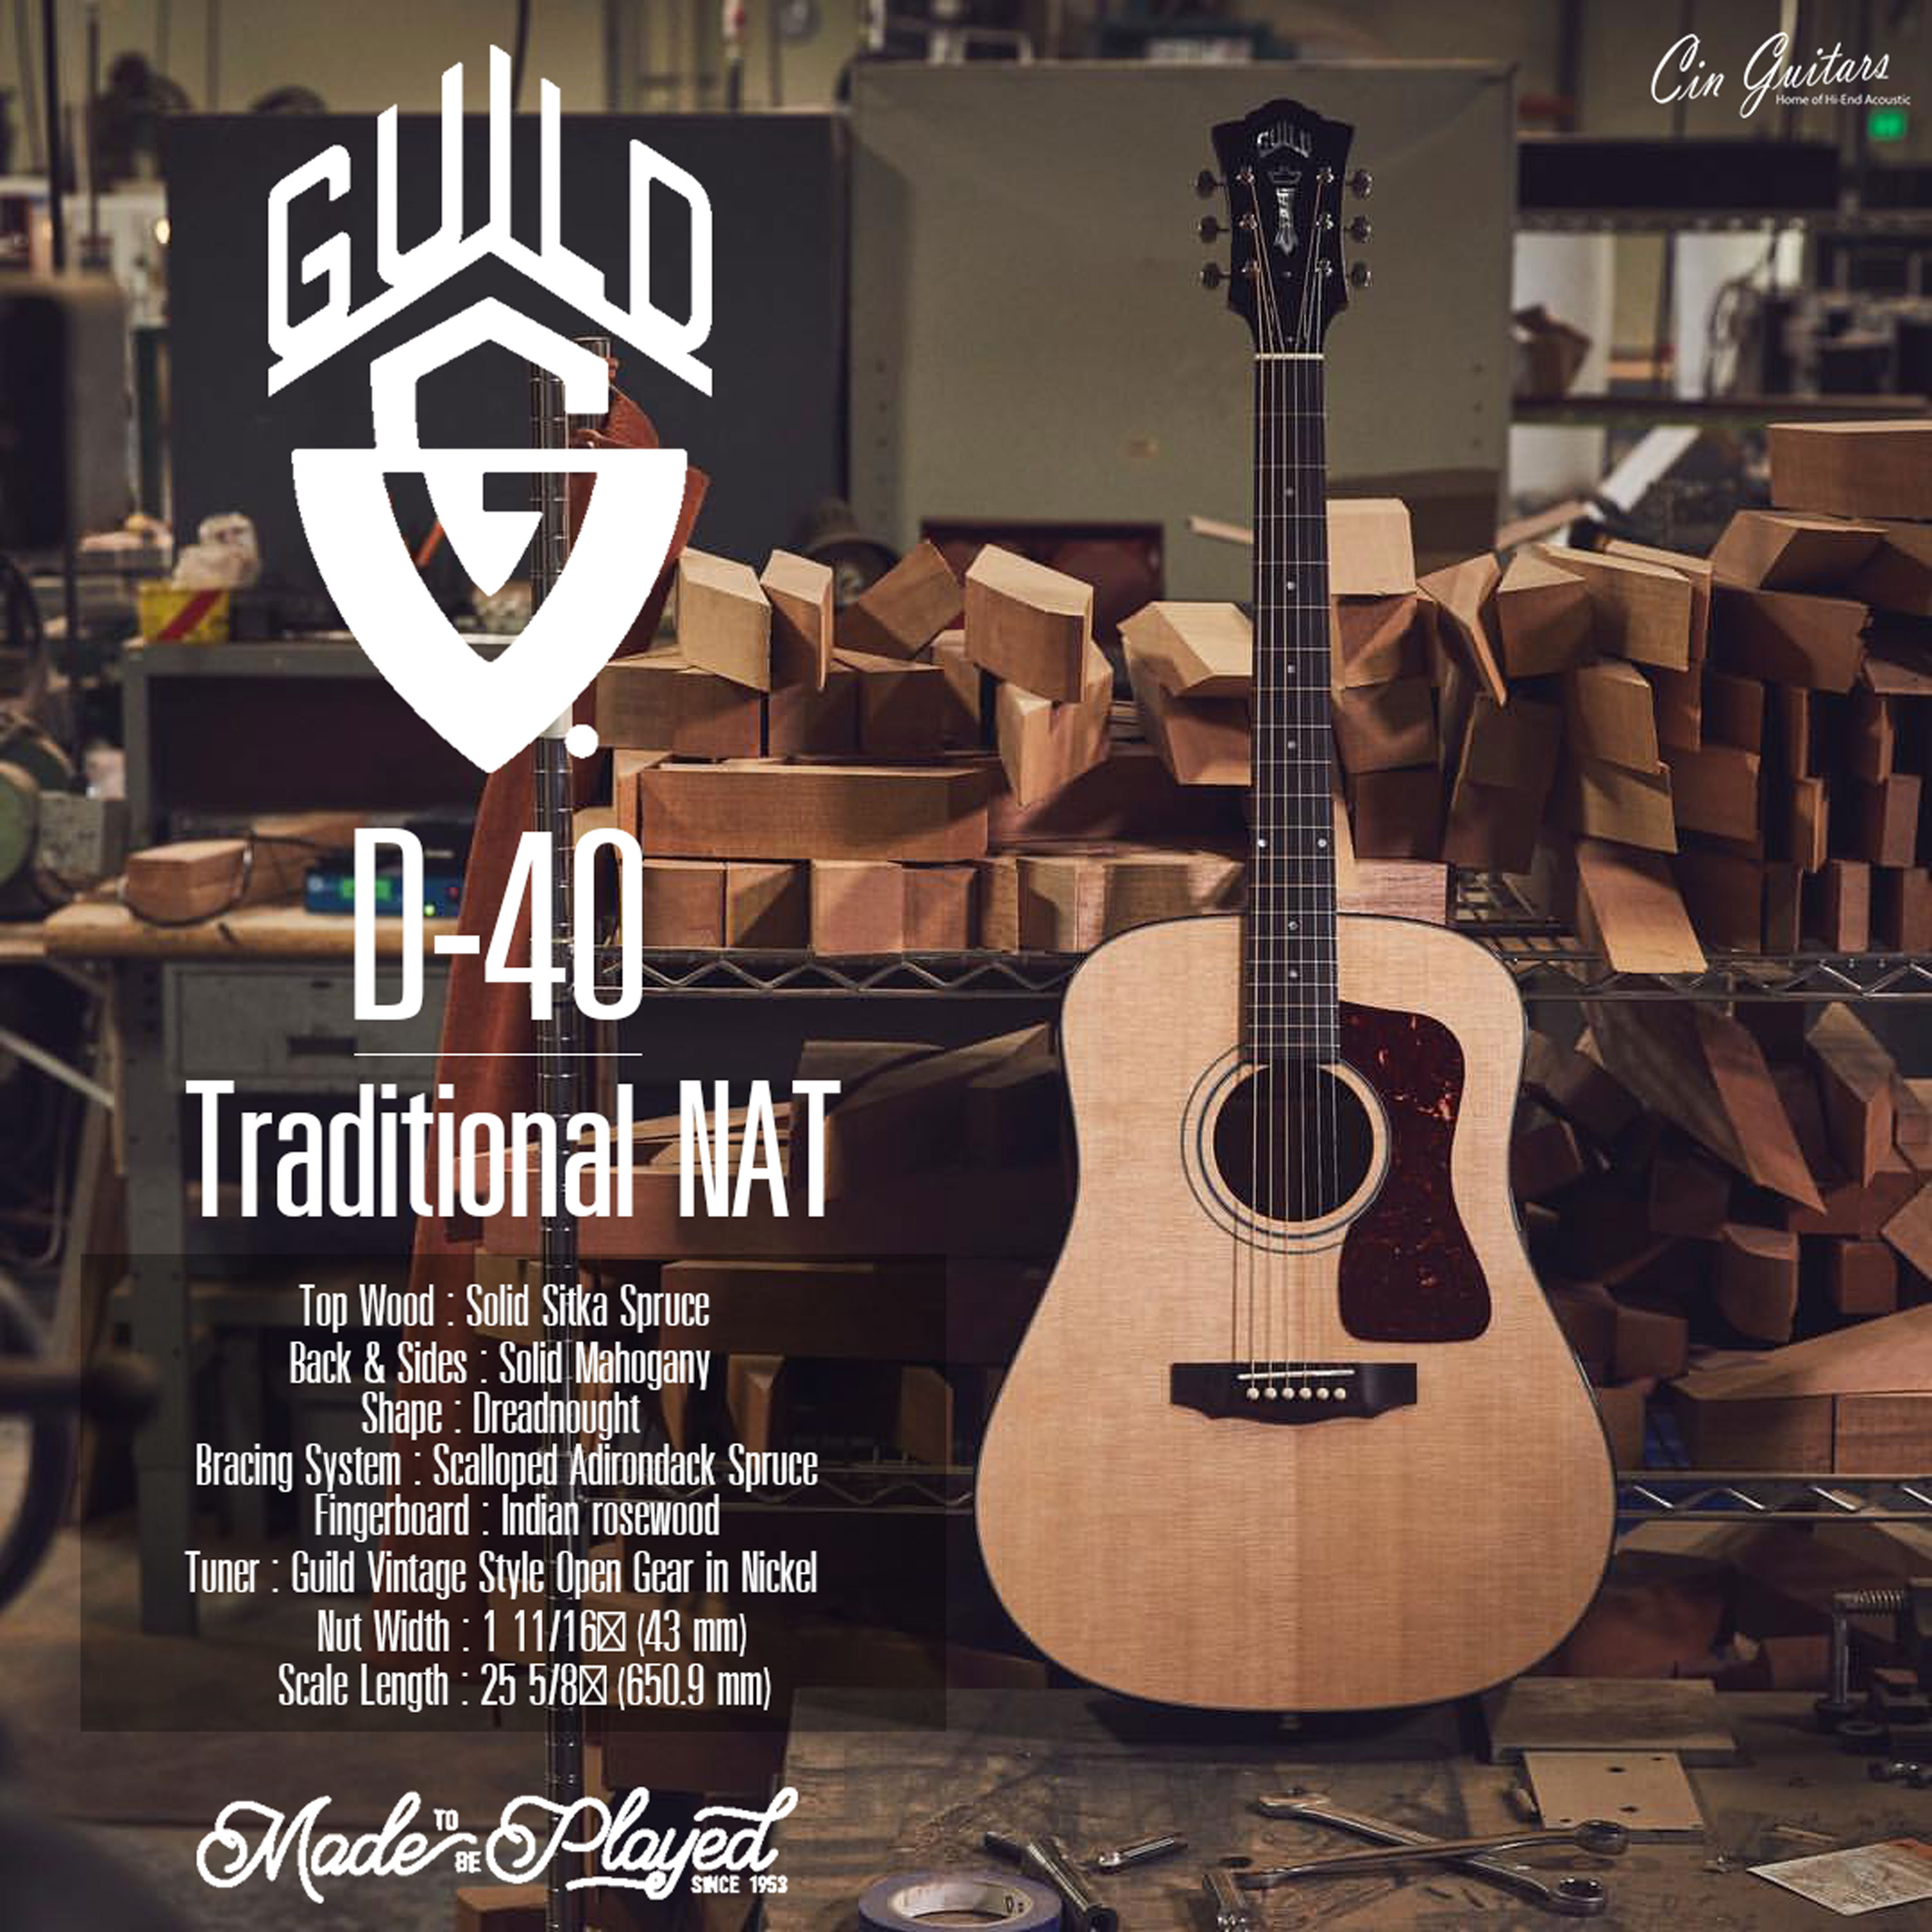 Guild D-40 Traditional NAT (Made in USA)